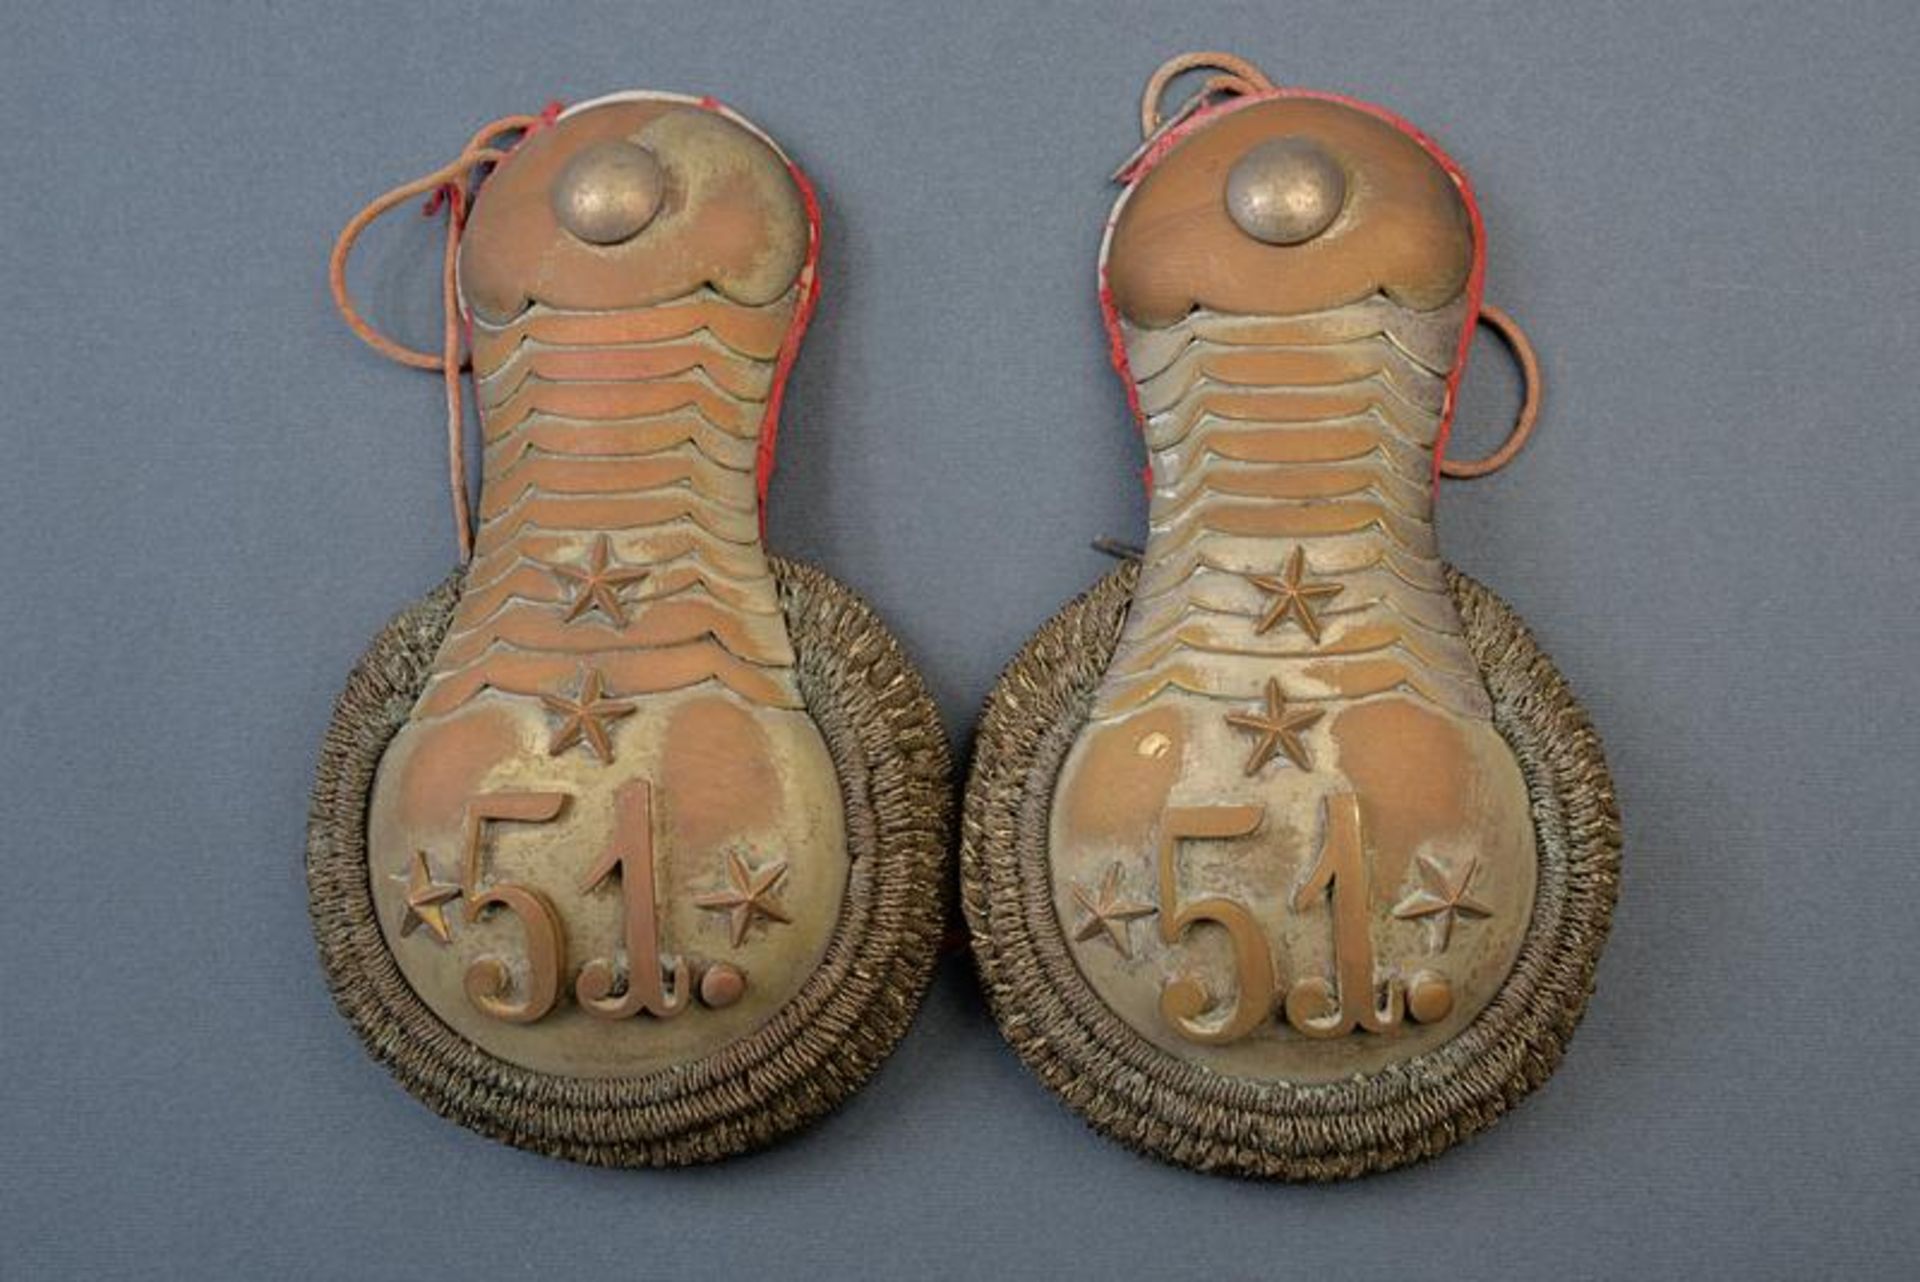 A pair of epaulets for a Staff captain of the 51st Chernygovsky Dragoon Regiment